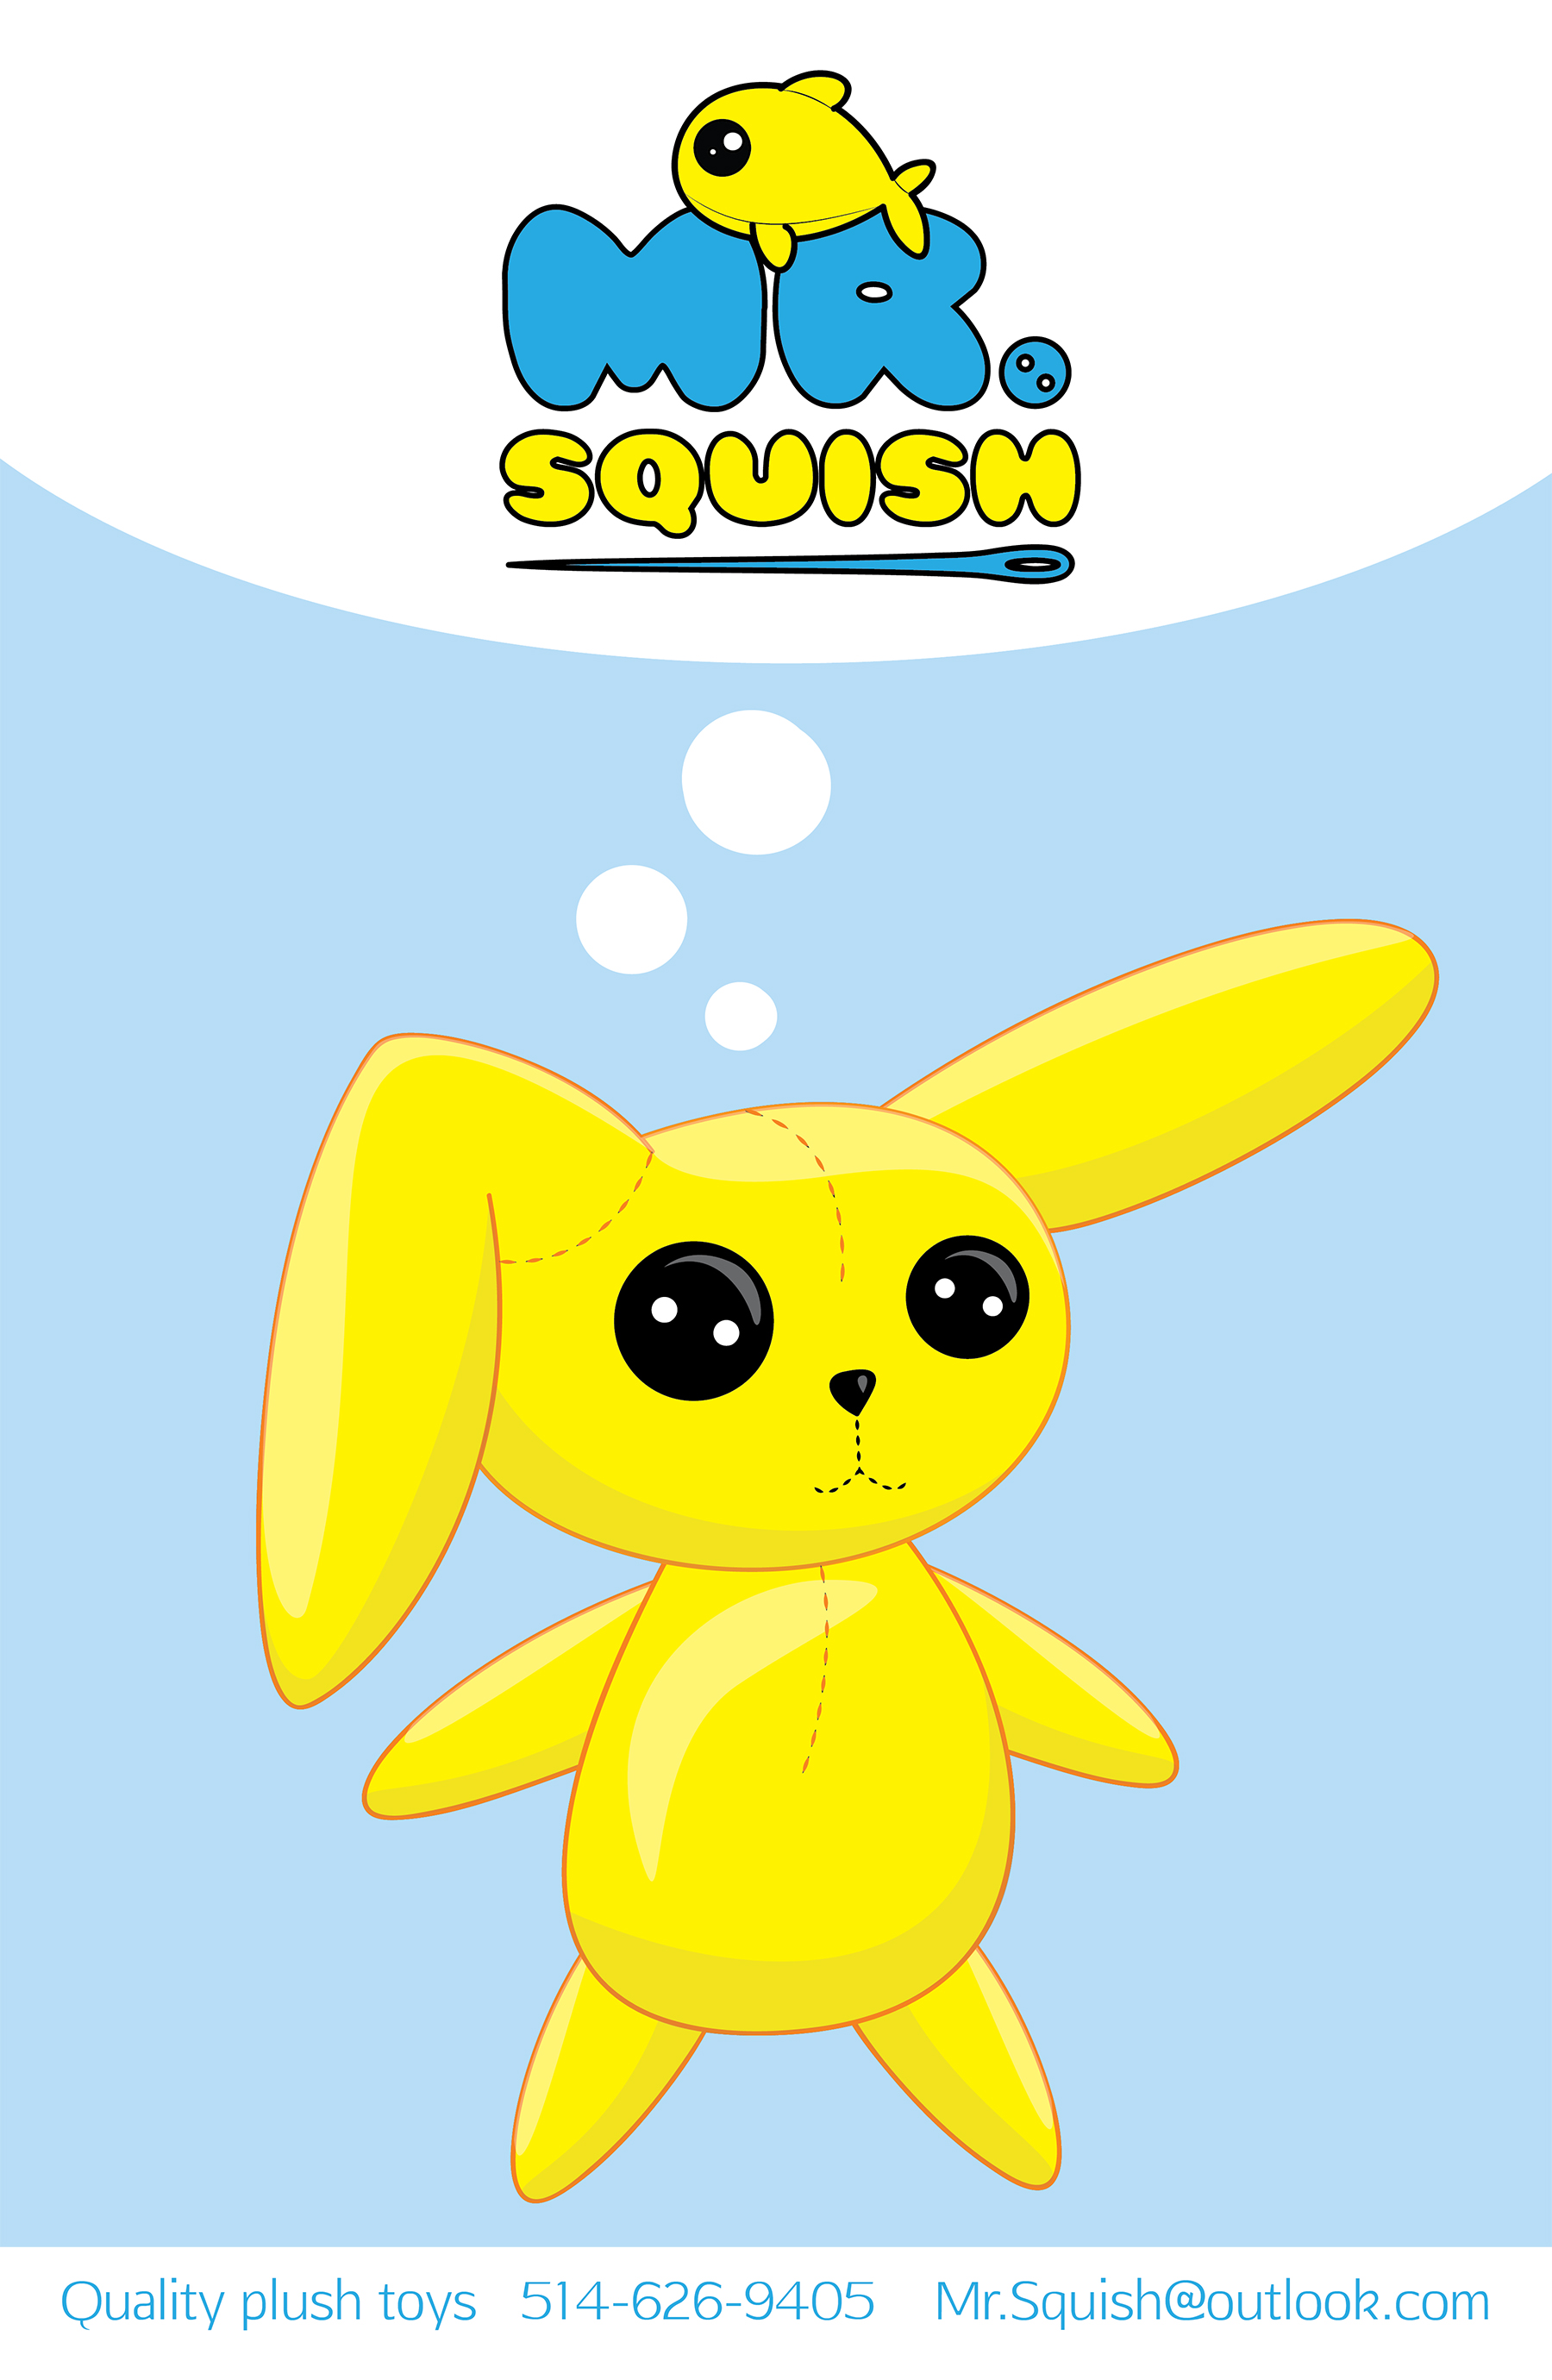 Poster of a plush bunny thinking about the Mr. Squish logo